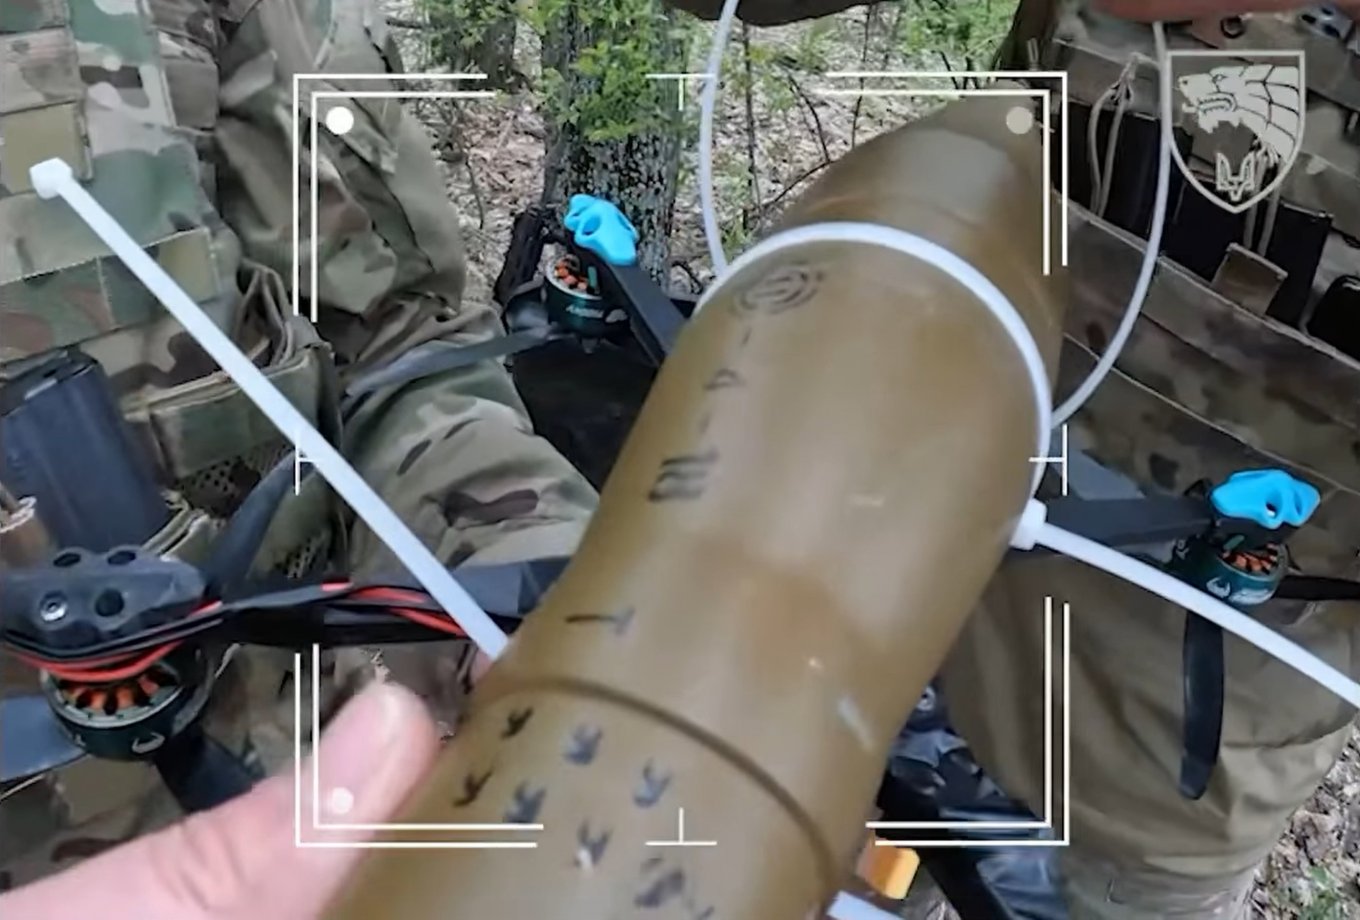 Ukraine’s SOF Operators Destroy russia’s Ironia Observation System, Defense Express